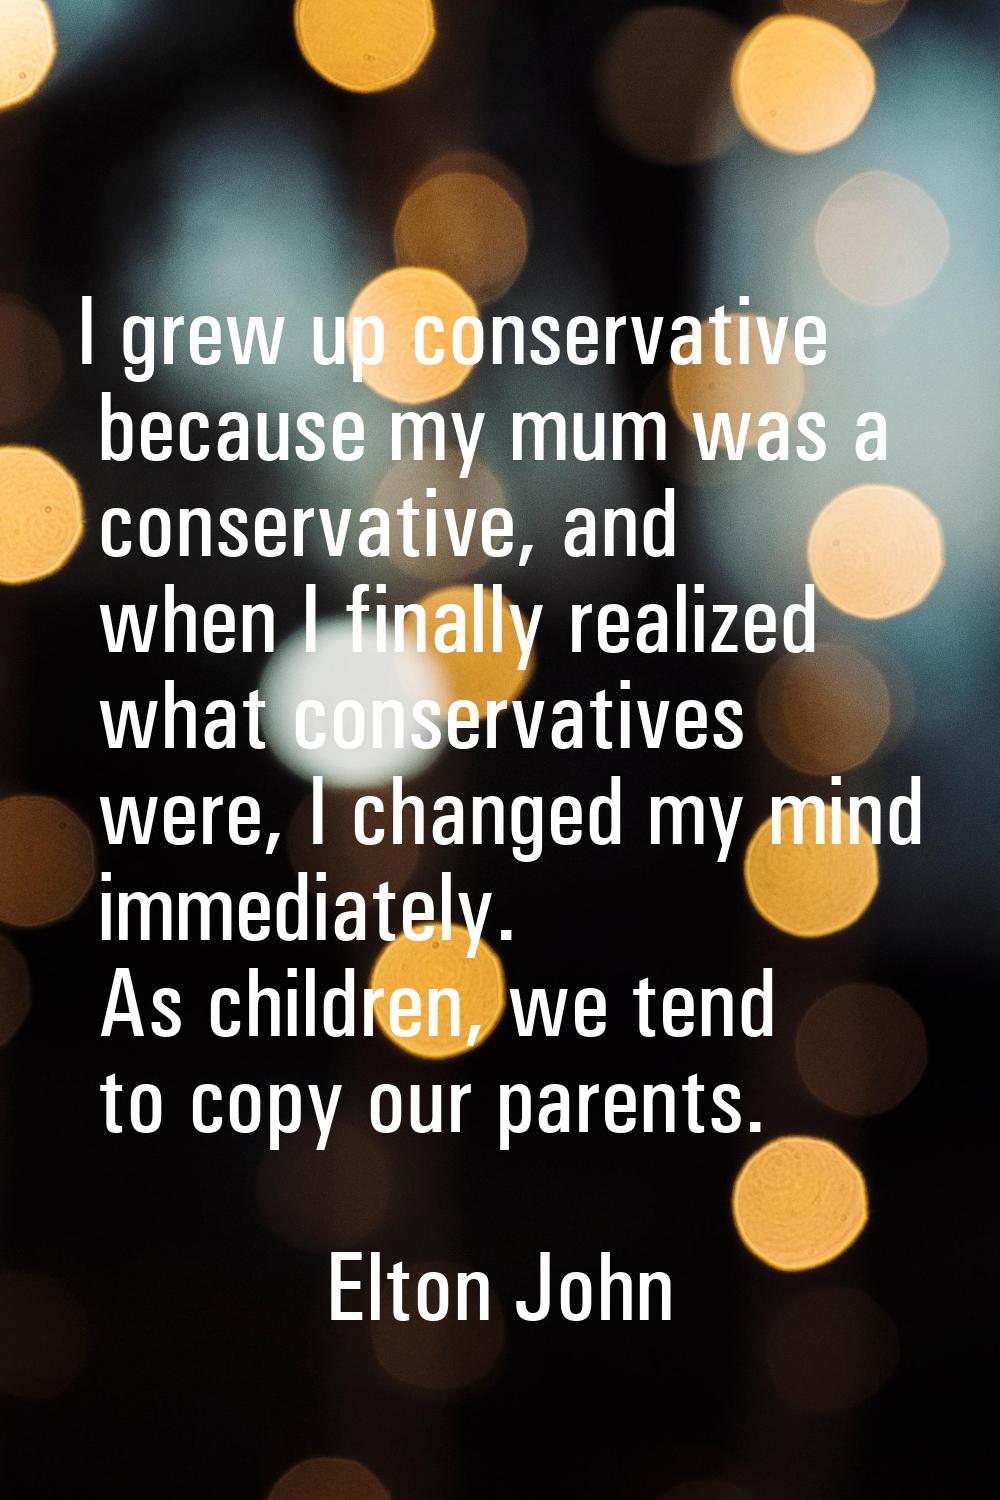 I grew up conservative because my mum was a conservative, and when I finally realized what conserva